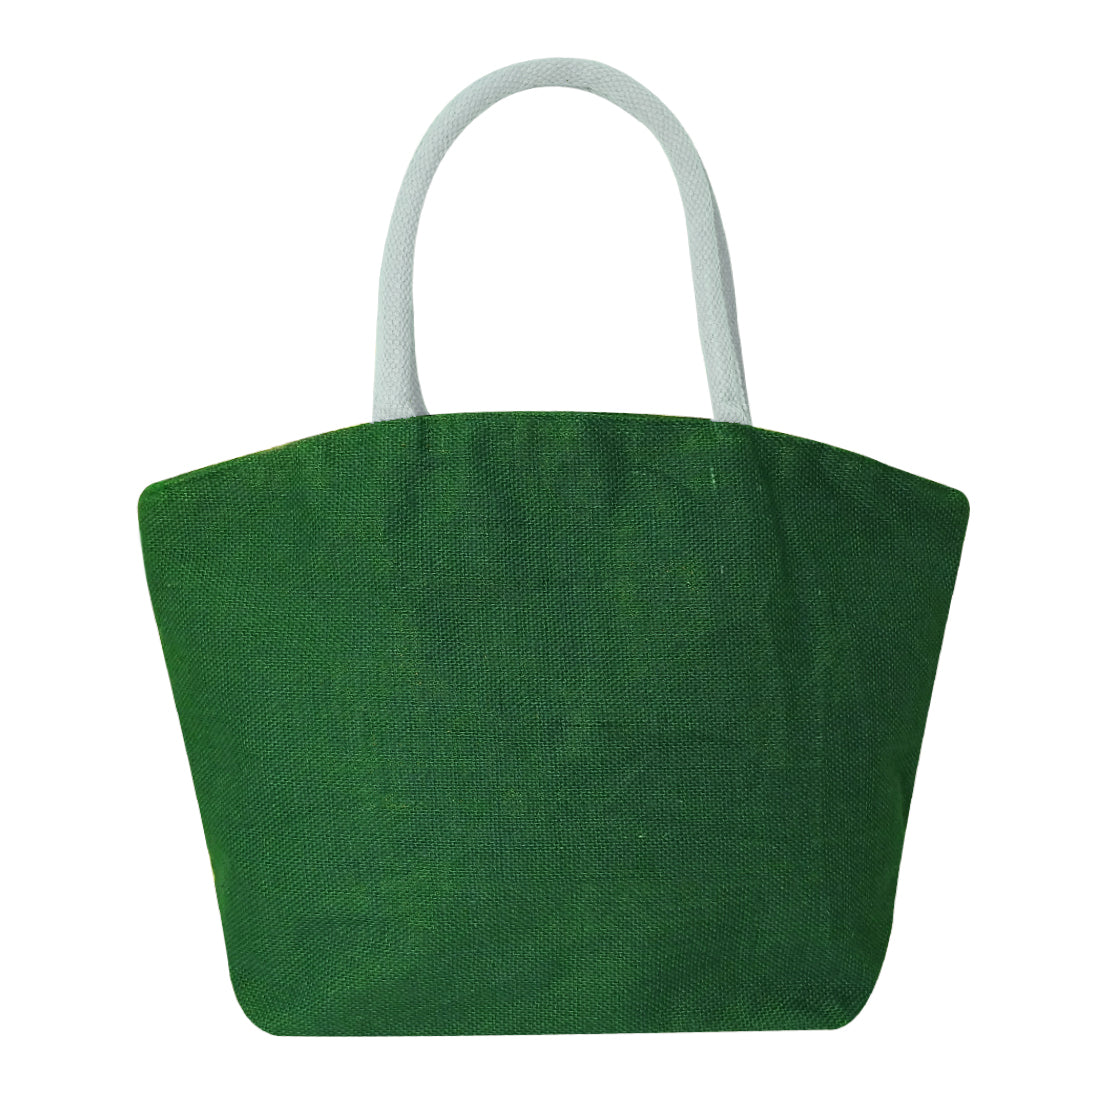 EARTHBAGS JUTE TOTE BAG WITH ZIPPER AND POCKET